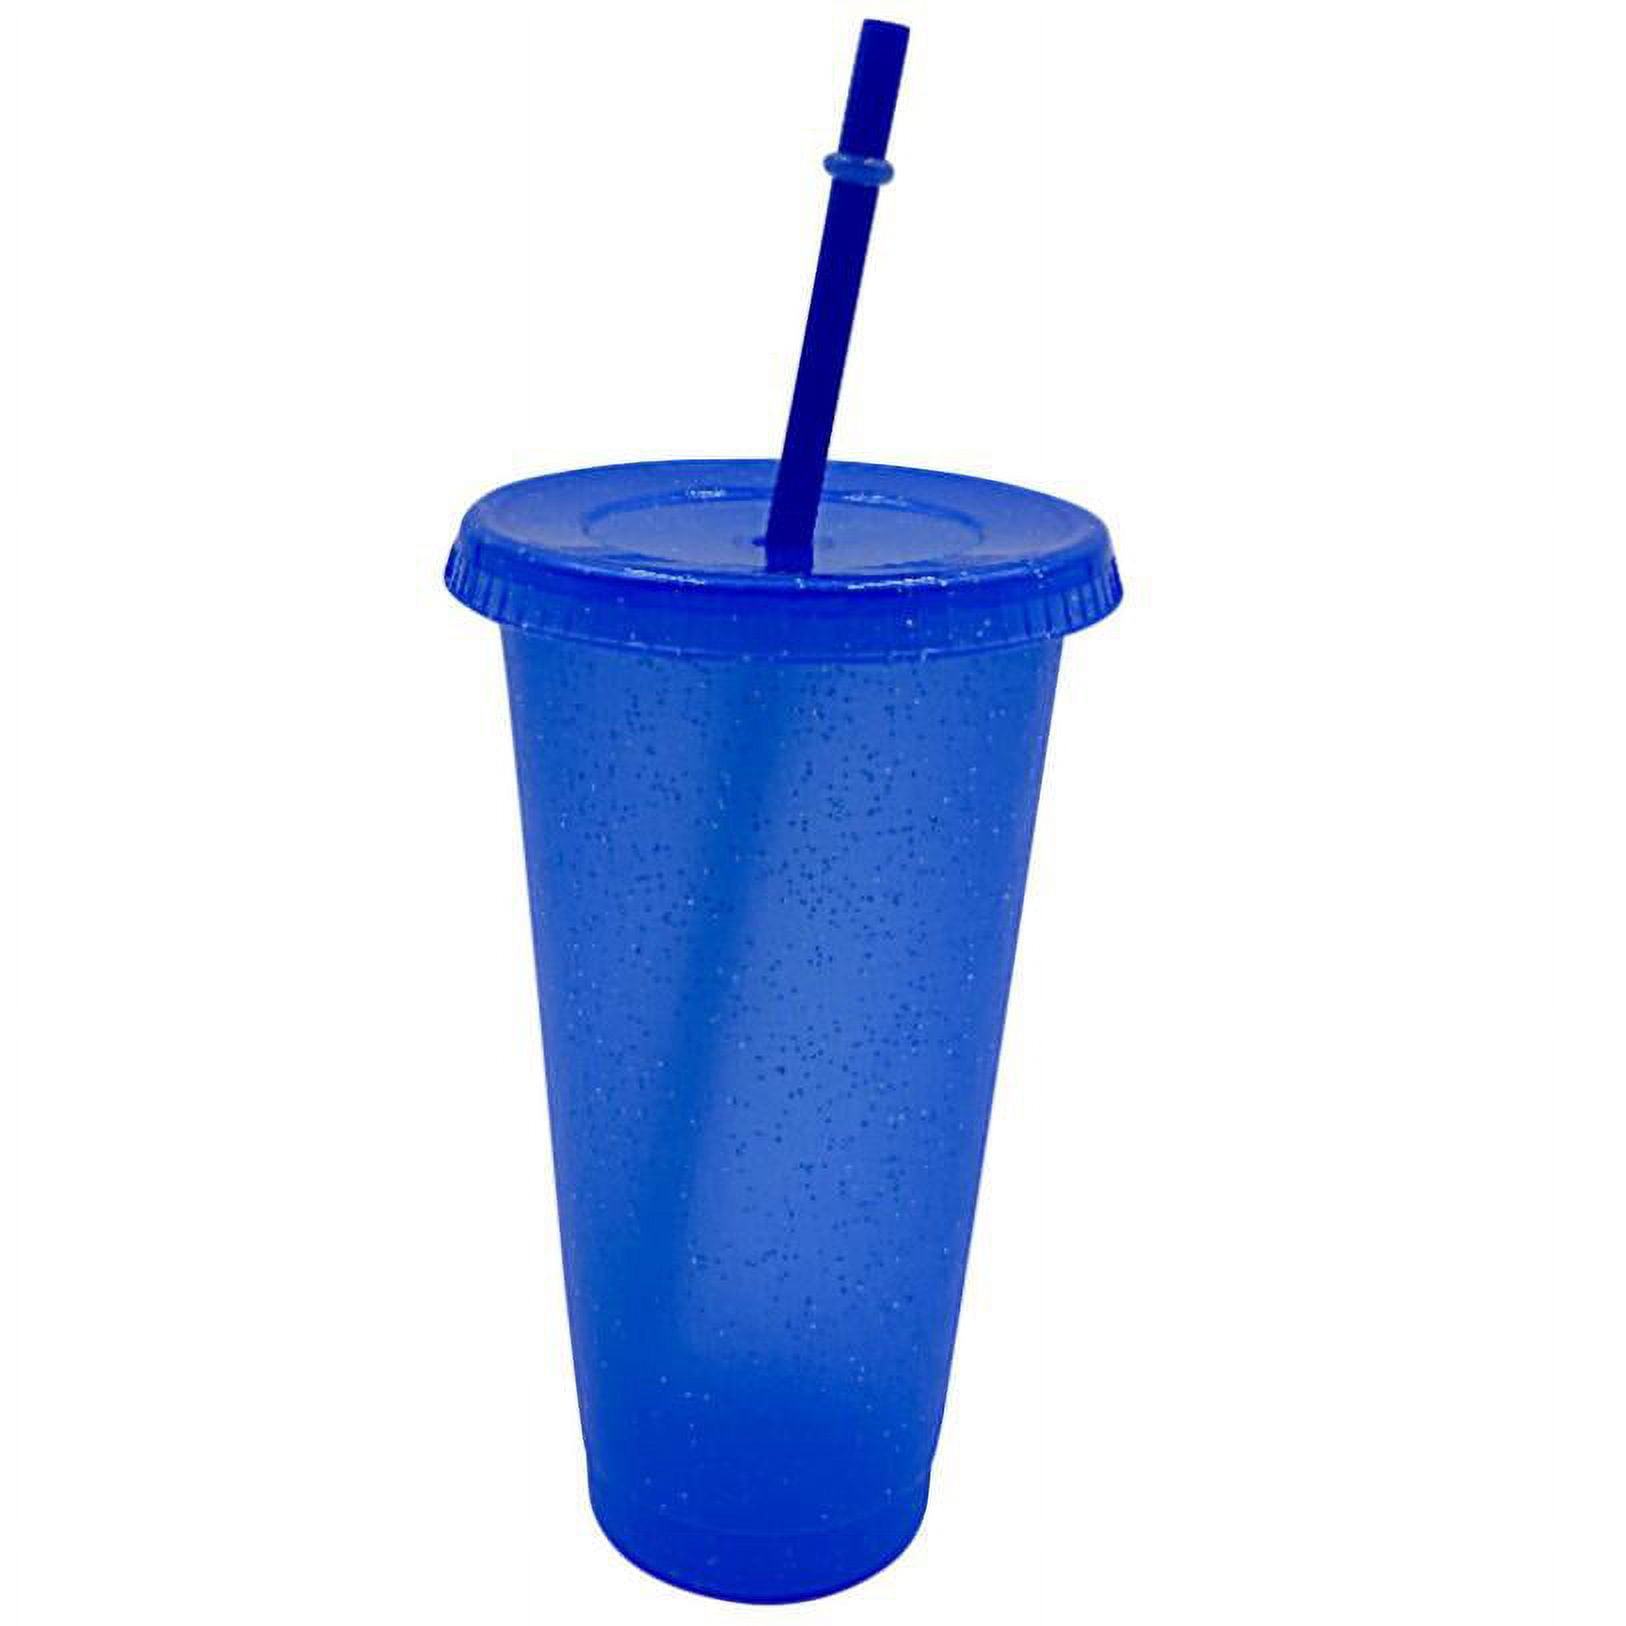 Cups with Lids and Straws for Adults - 5 Glitter Reusable Cups with Lids  and Straws in Citrus Colors…See more Cups with Lids and Straws for Adults -  5